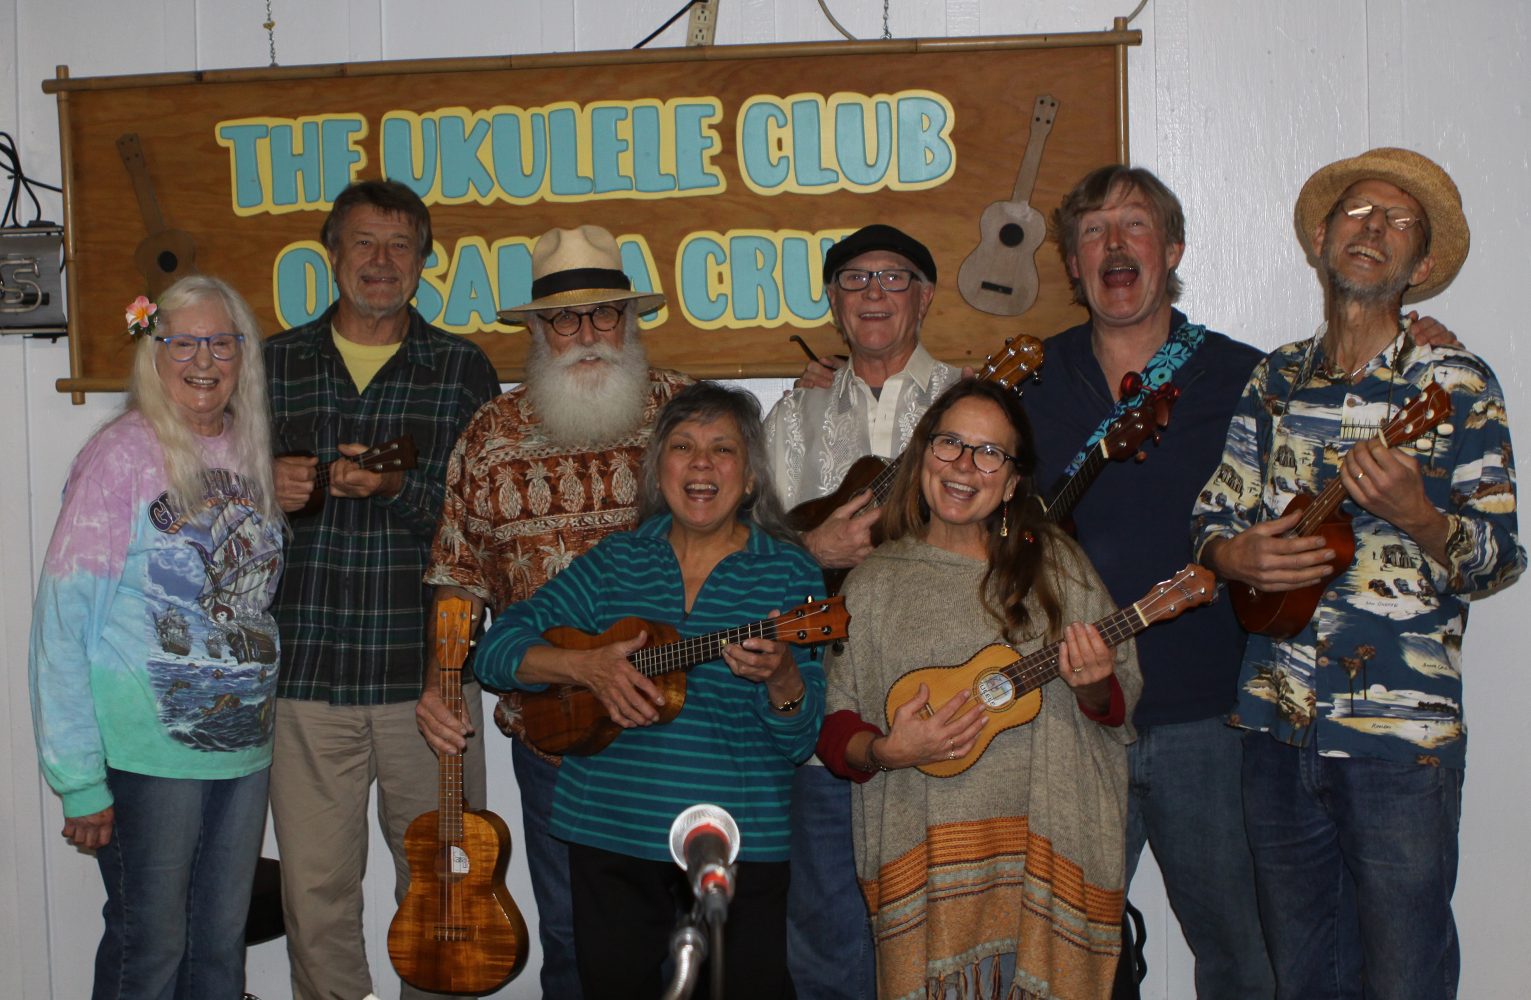 Ukulele Club of Santa Cruz members who attended first meetings and still attending regularly